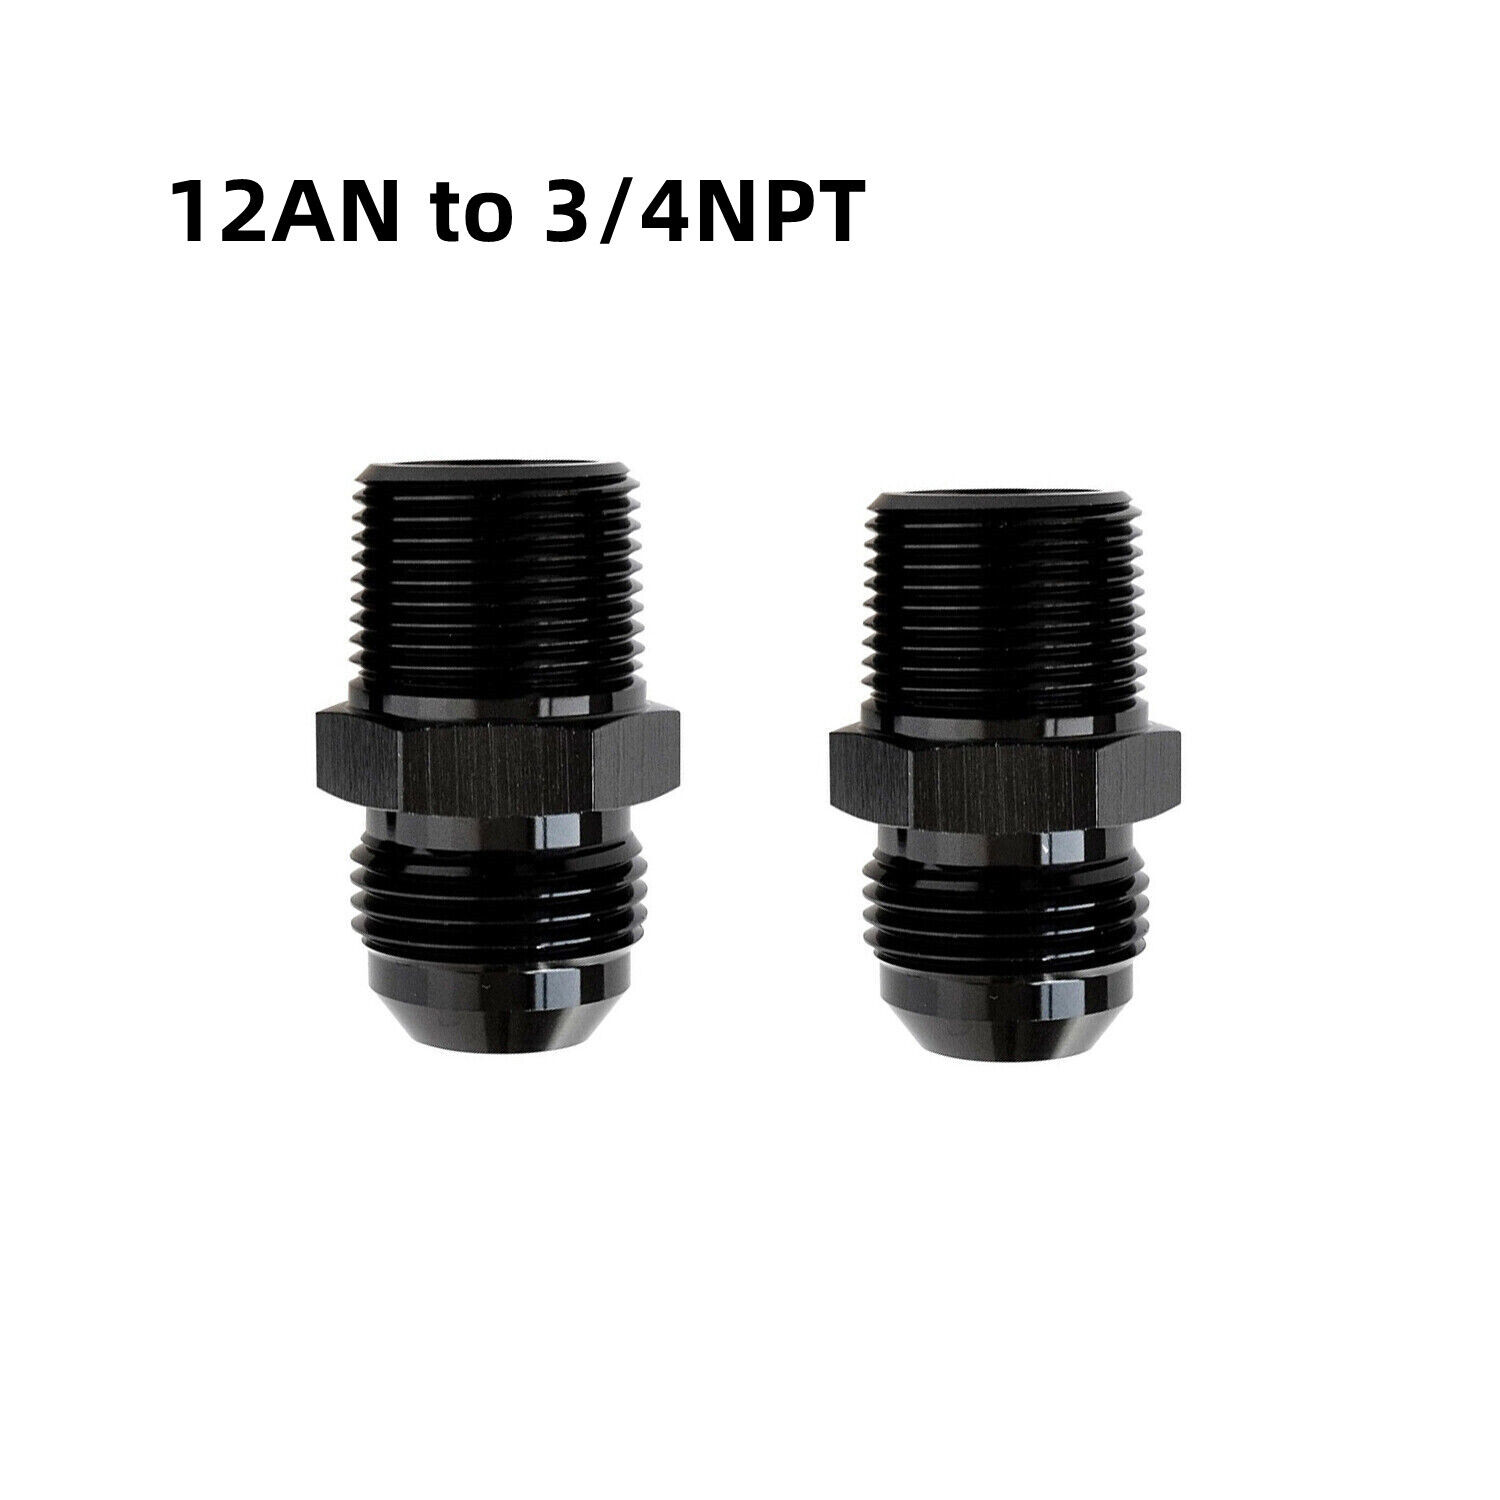 2x12AN Male Flare to 1/2 3/4 NPT Straight Nipple Adapter Black Anodized Aluminum